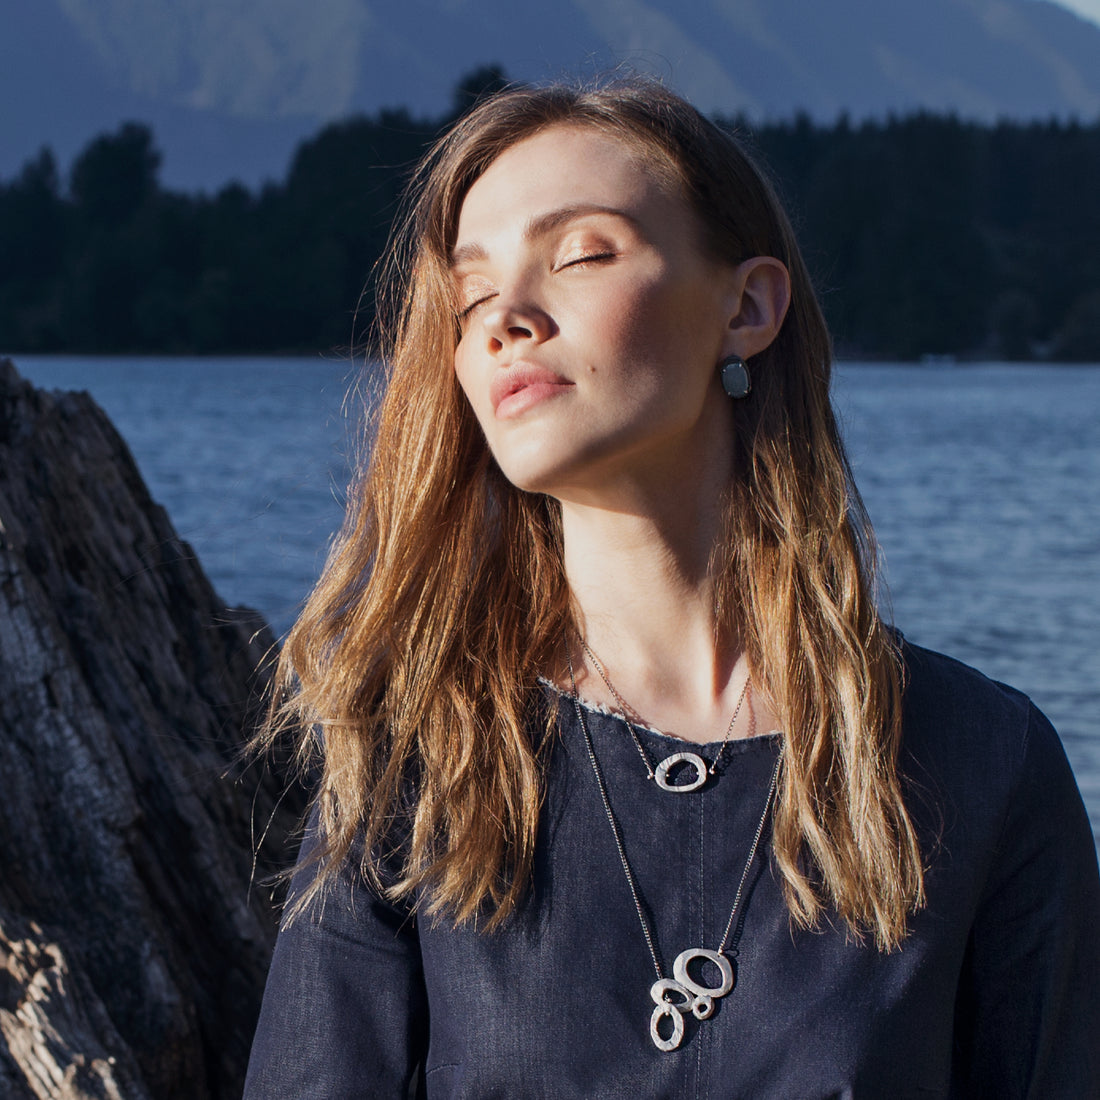 The Skipping Stones Simple Necklace in Silver will make you feel confident in your effortless style. 